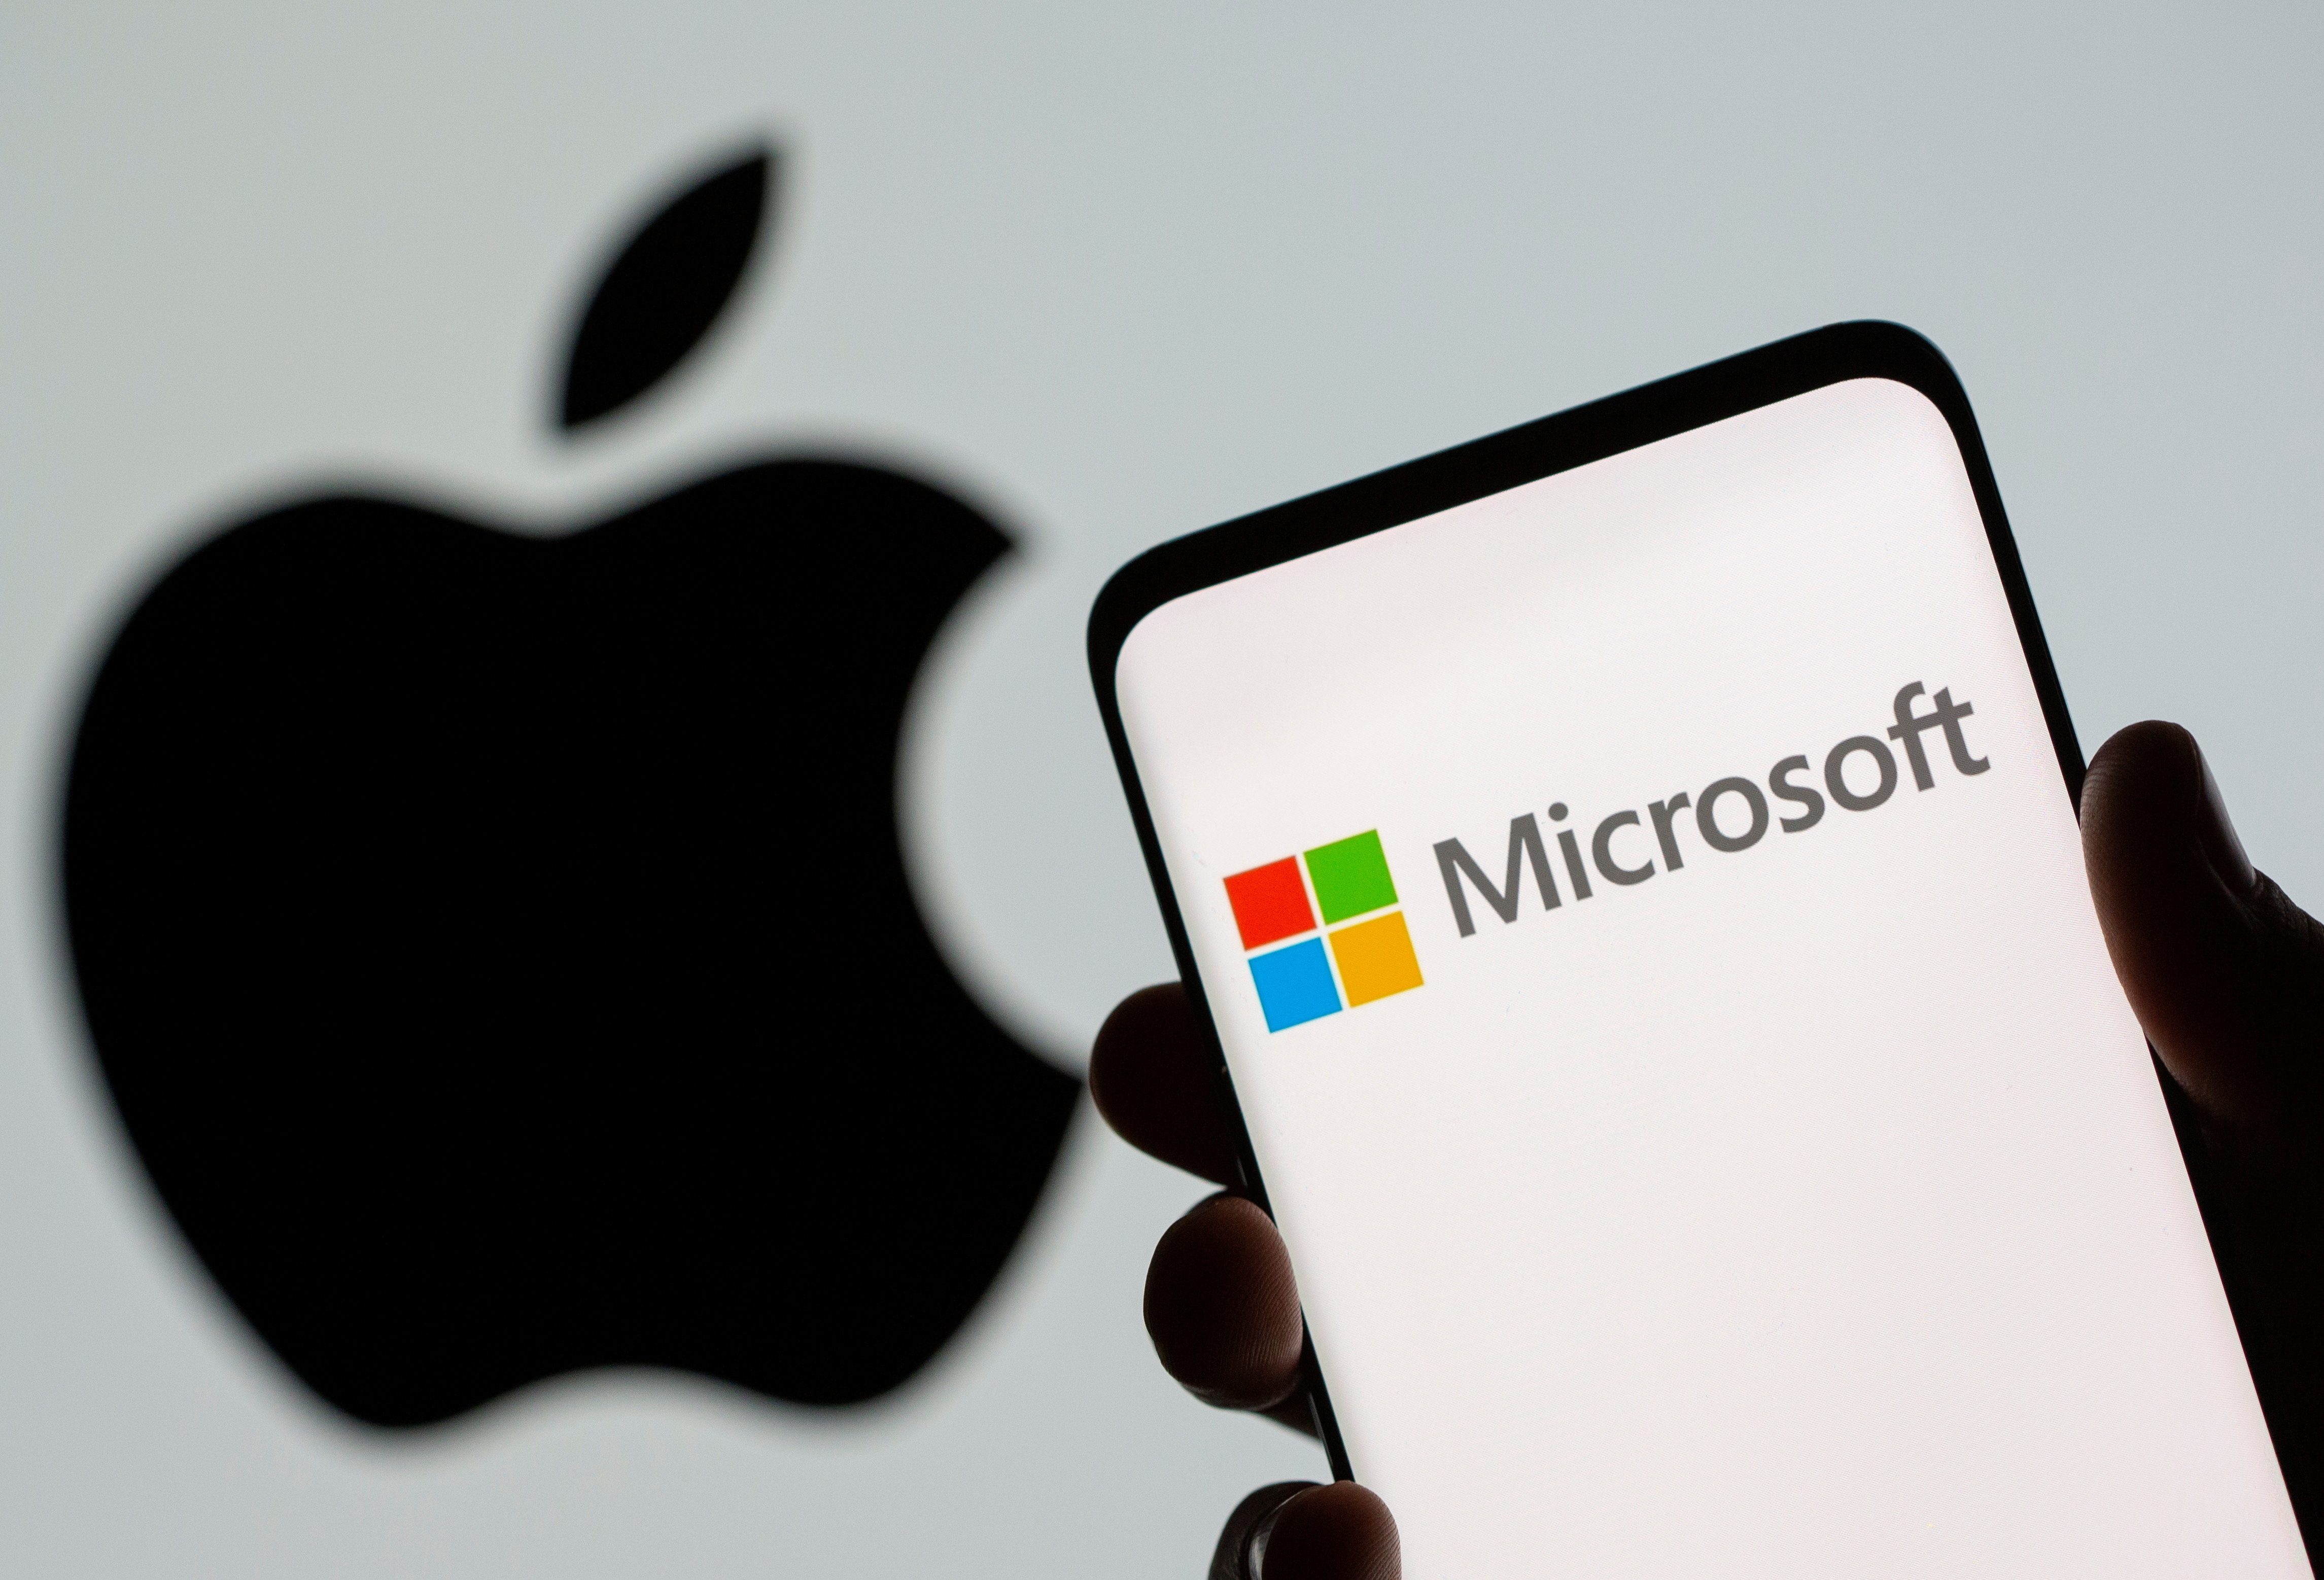 Move over Apple, Microsoft now the world’s most valuable company